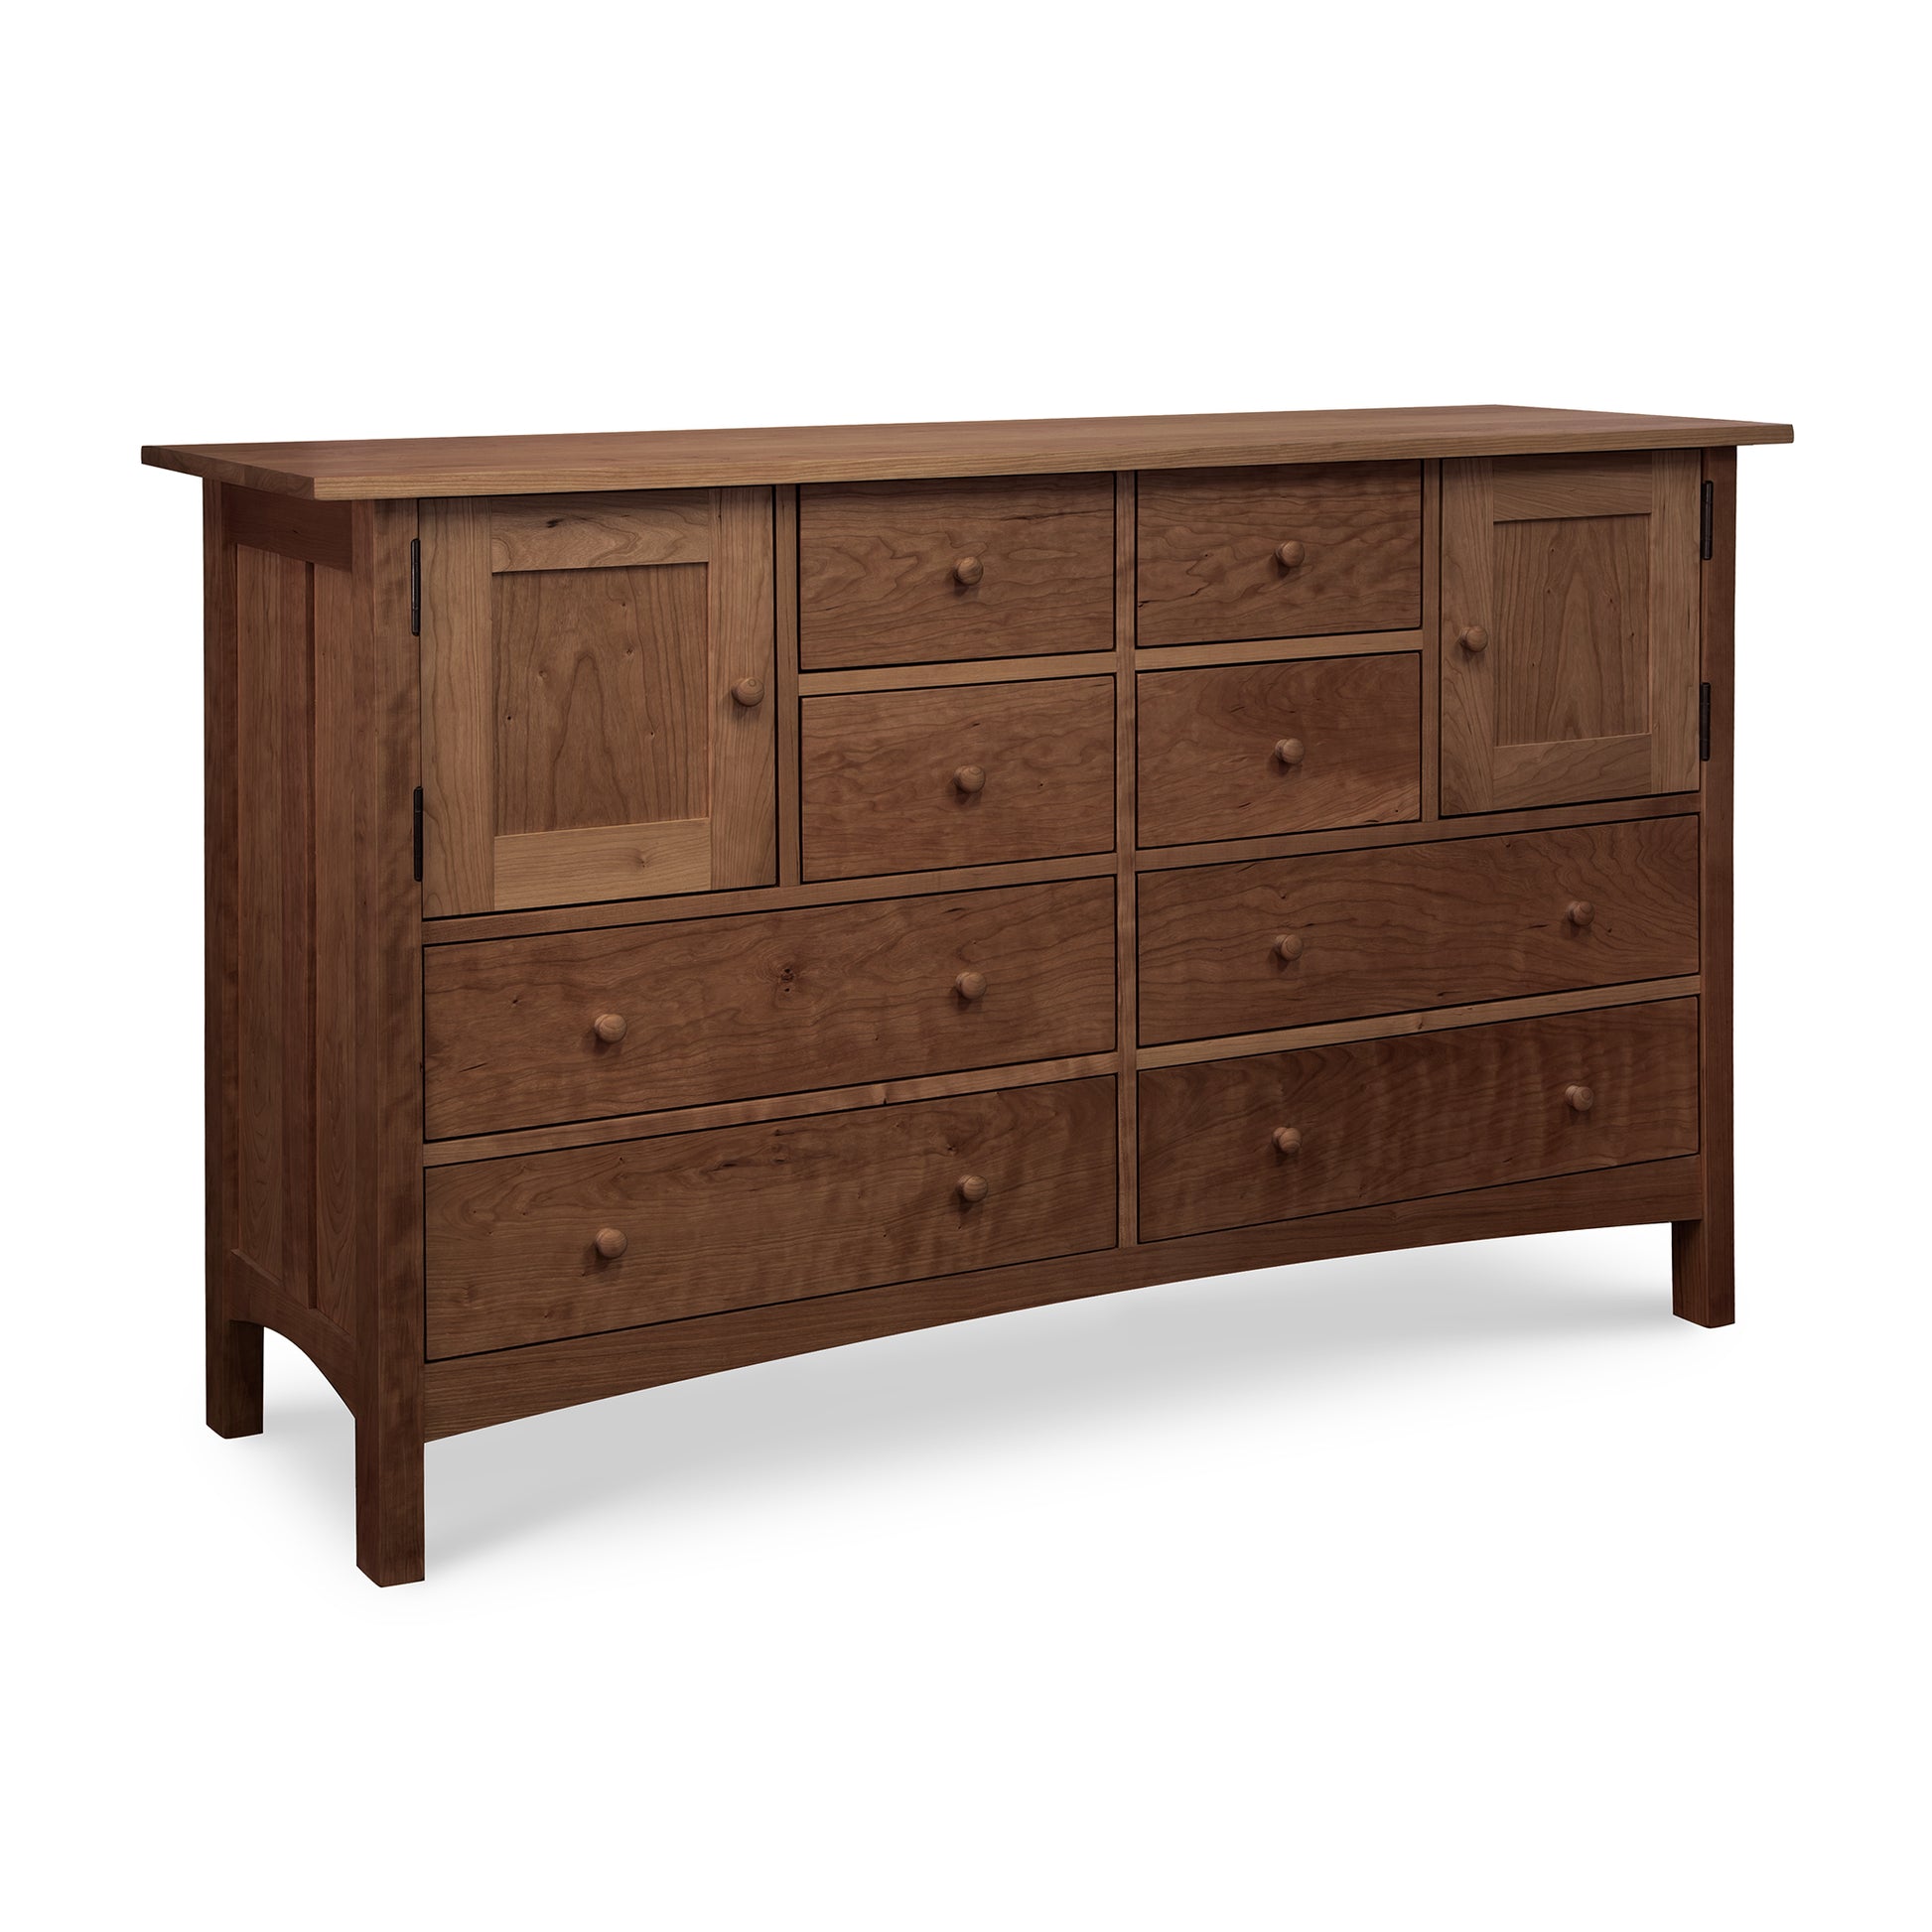 This is a Burlington Shaker 8-Drawer 2-Door Dresser from Vermont Furniture Designs, with multiple drawers, featuring a symmetrical design and round drawer pulls.